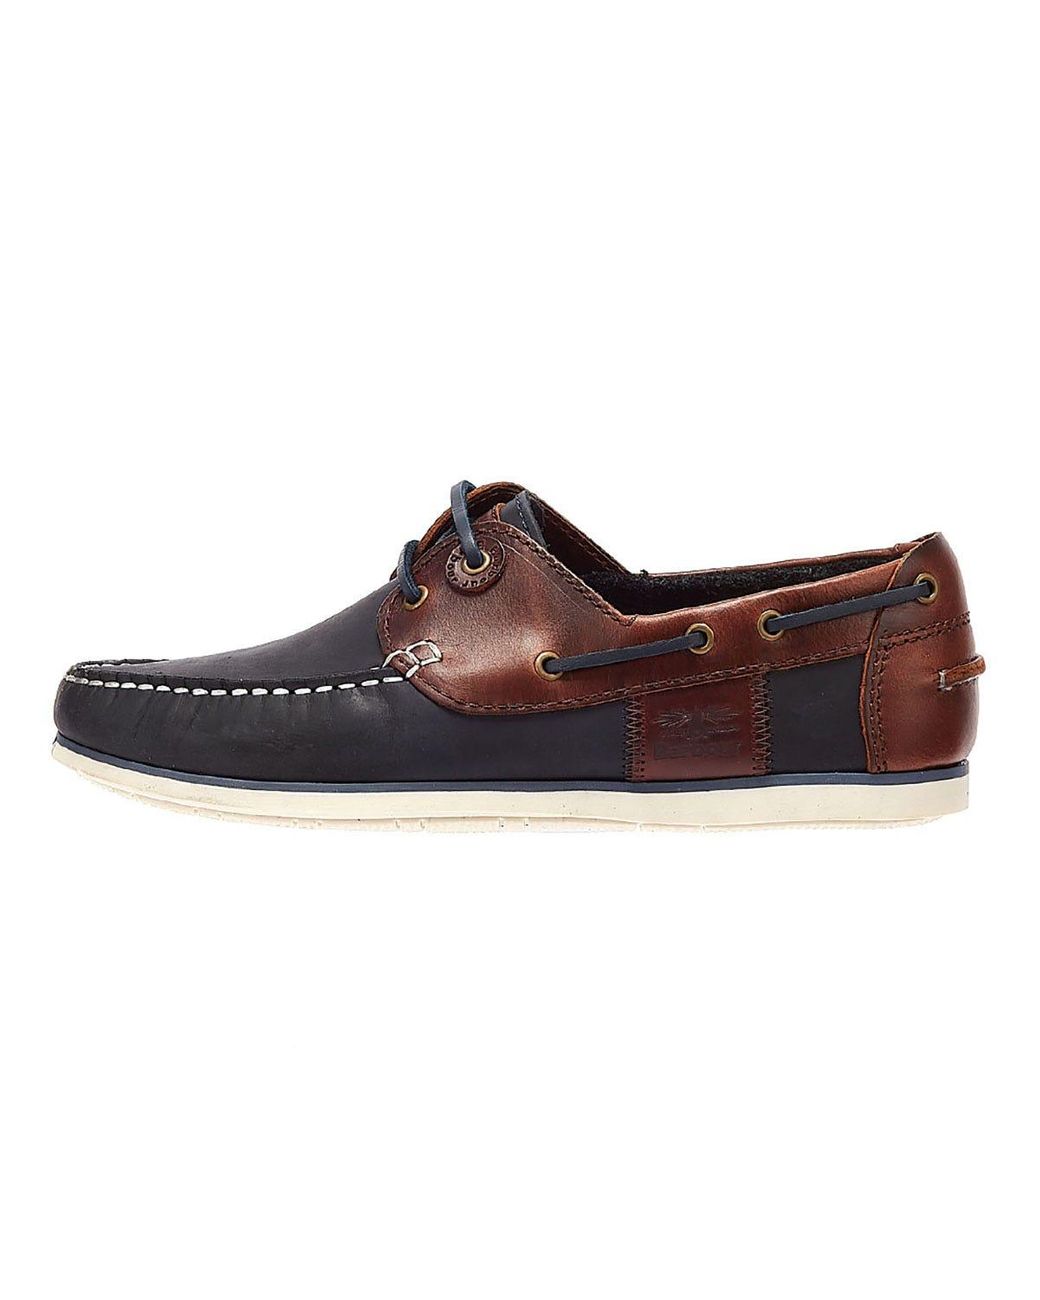 Barbour Leather /brown Capstan Boat Shoes in Navy (Blue) for Men - Lyst